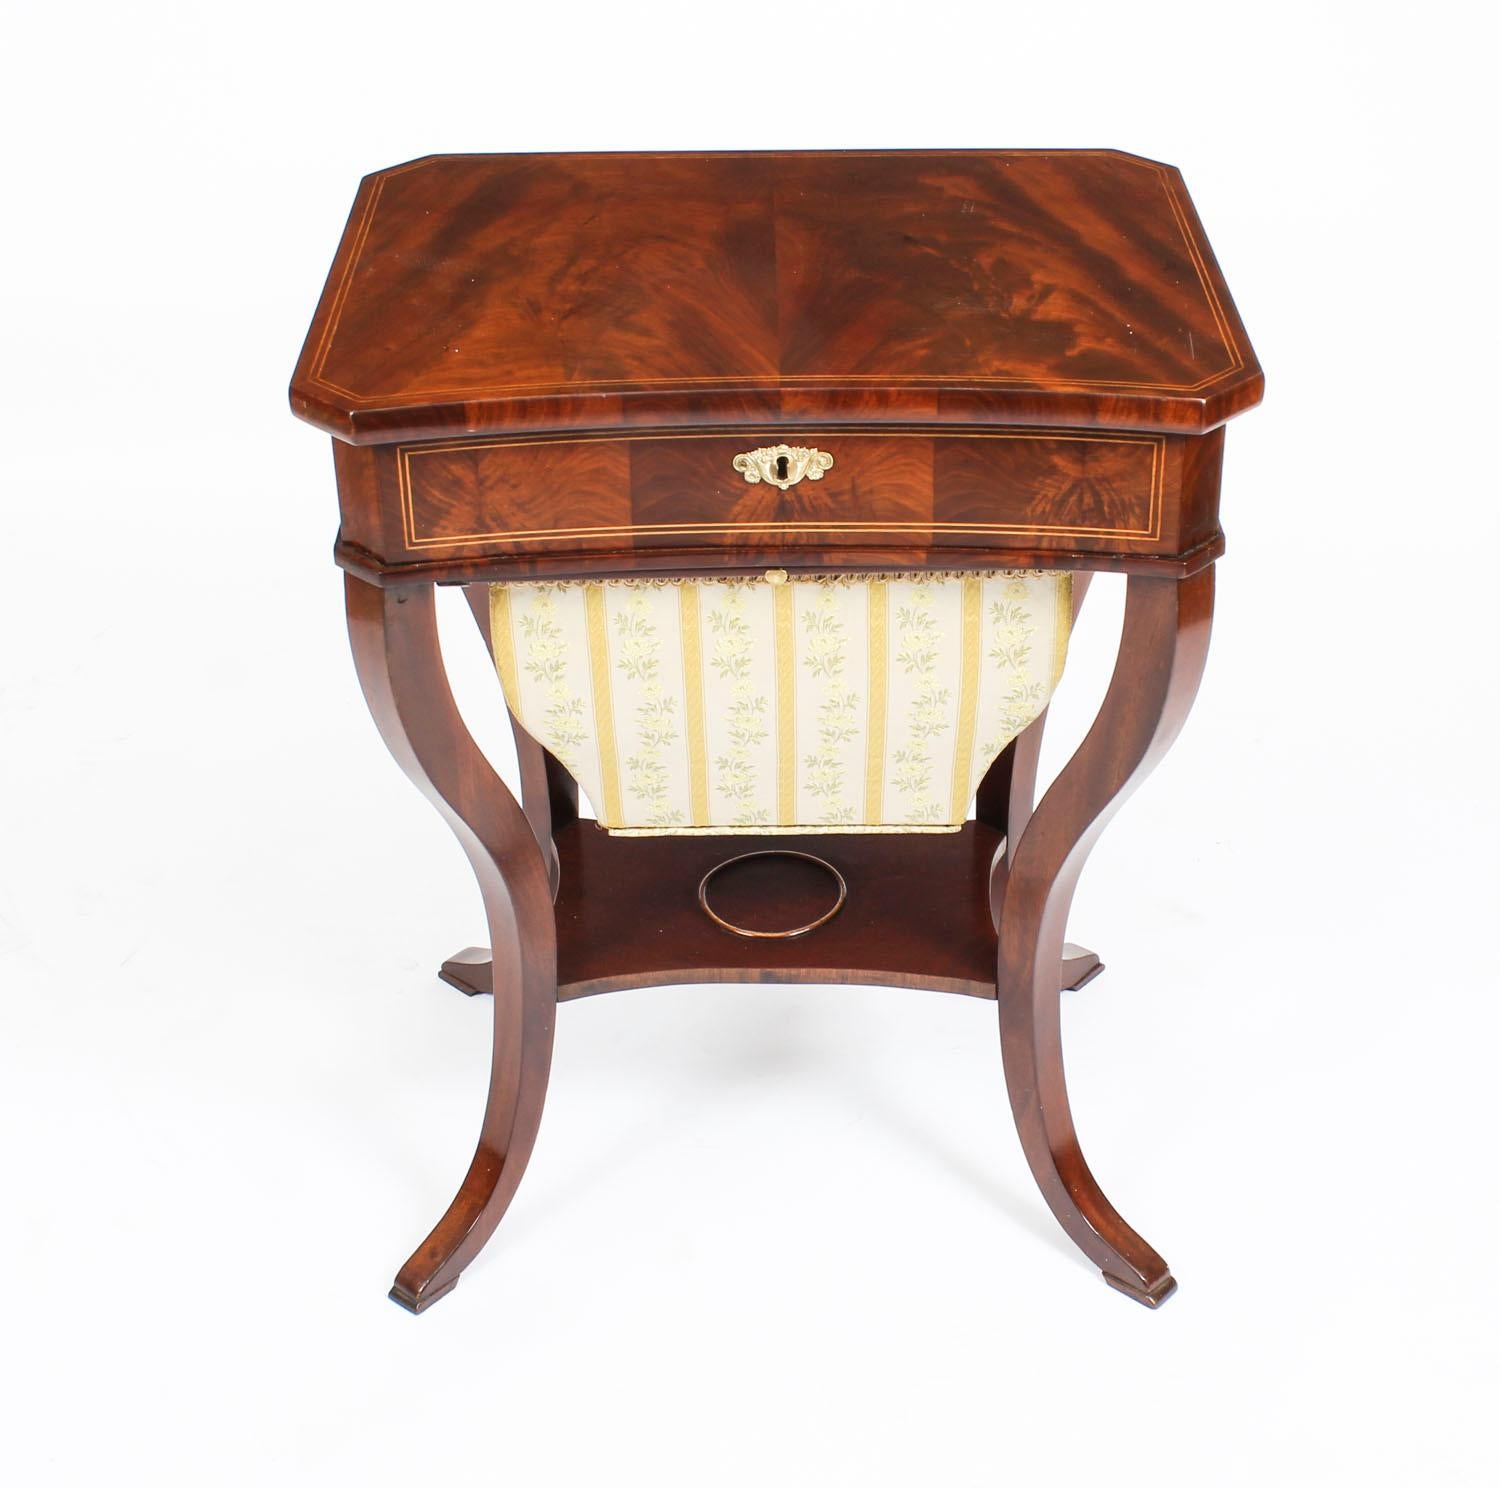 A beautiful antique mahogany Austrian Biedermeier work box circa 1820 in date.

The work table features boxwood stringing on the lift up top, the interior is fitted with various compartments some with fitted lids for your sewing items, a lift up